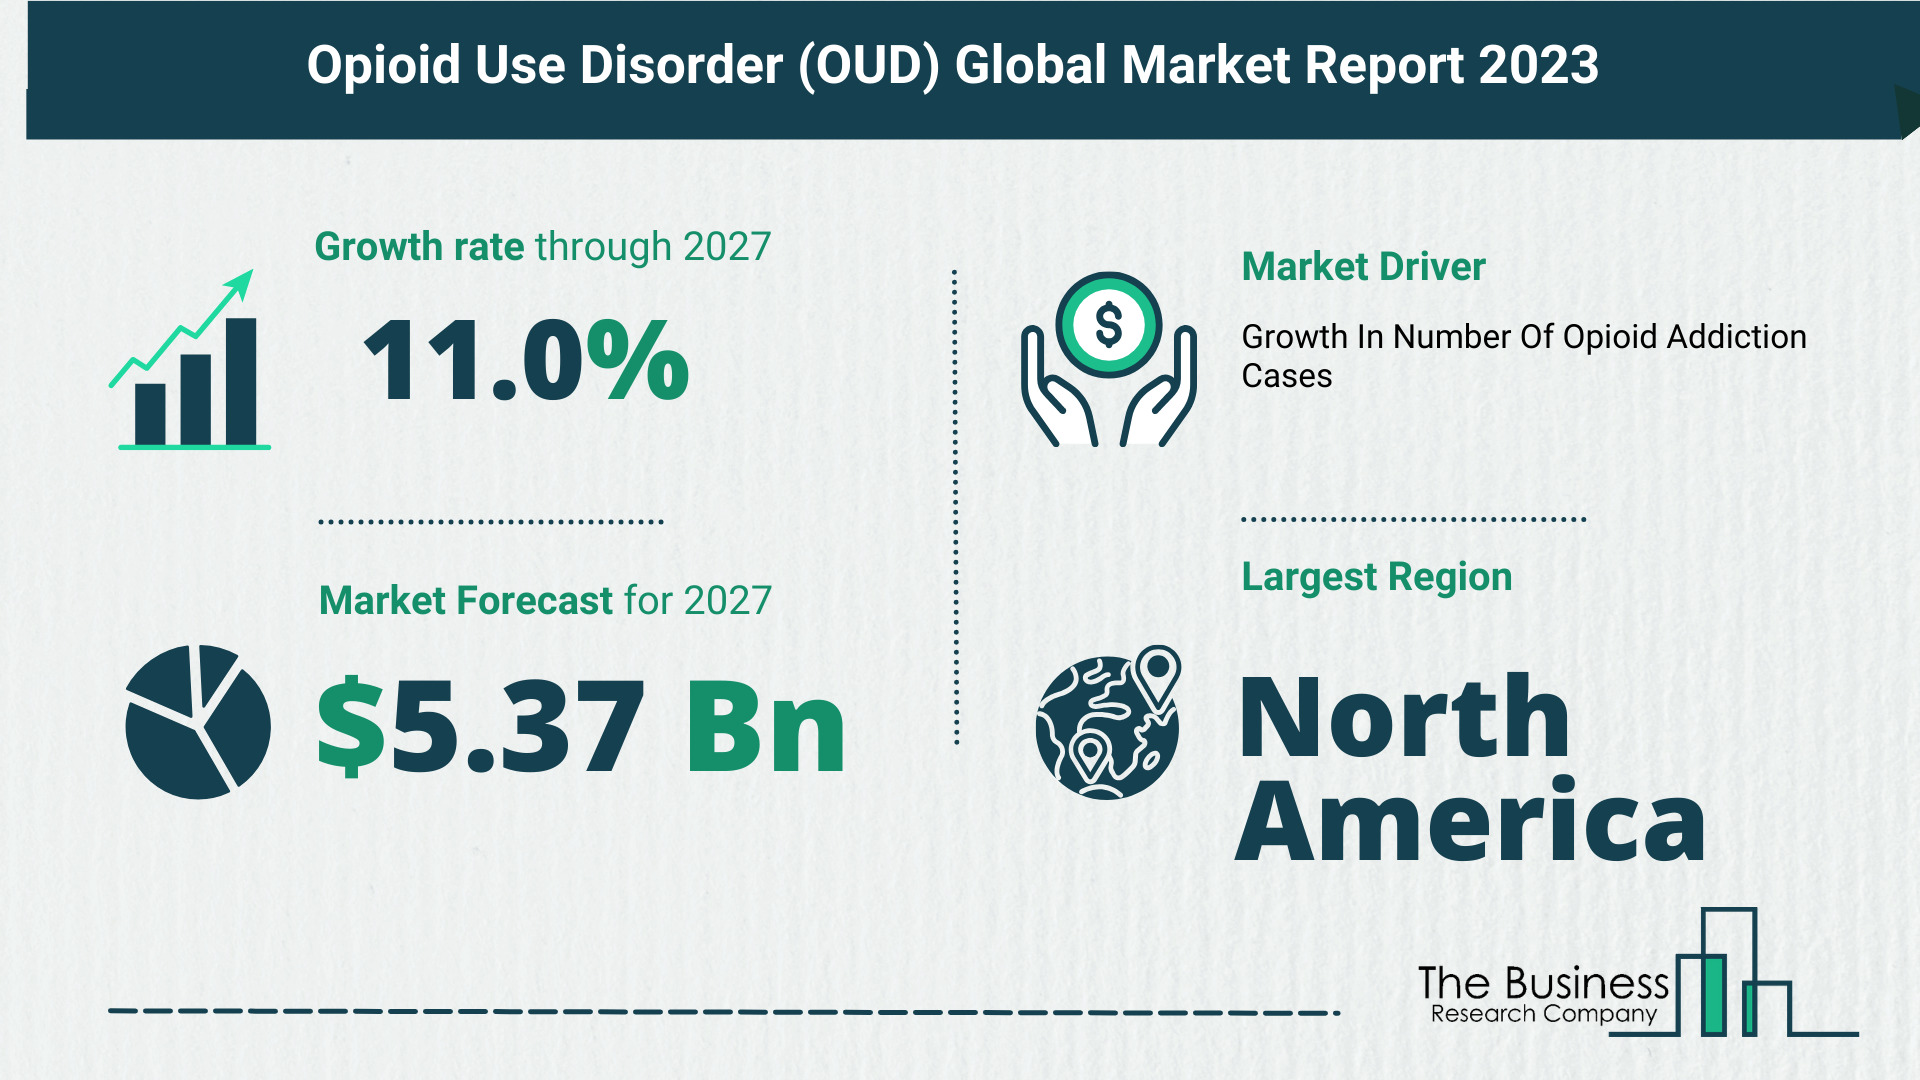 Global Opioid Use Disorder Market Analysis 2023: Size, Share, And Key Trends